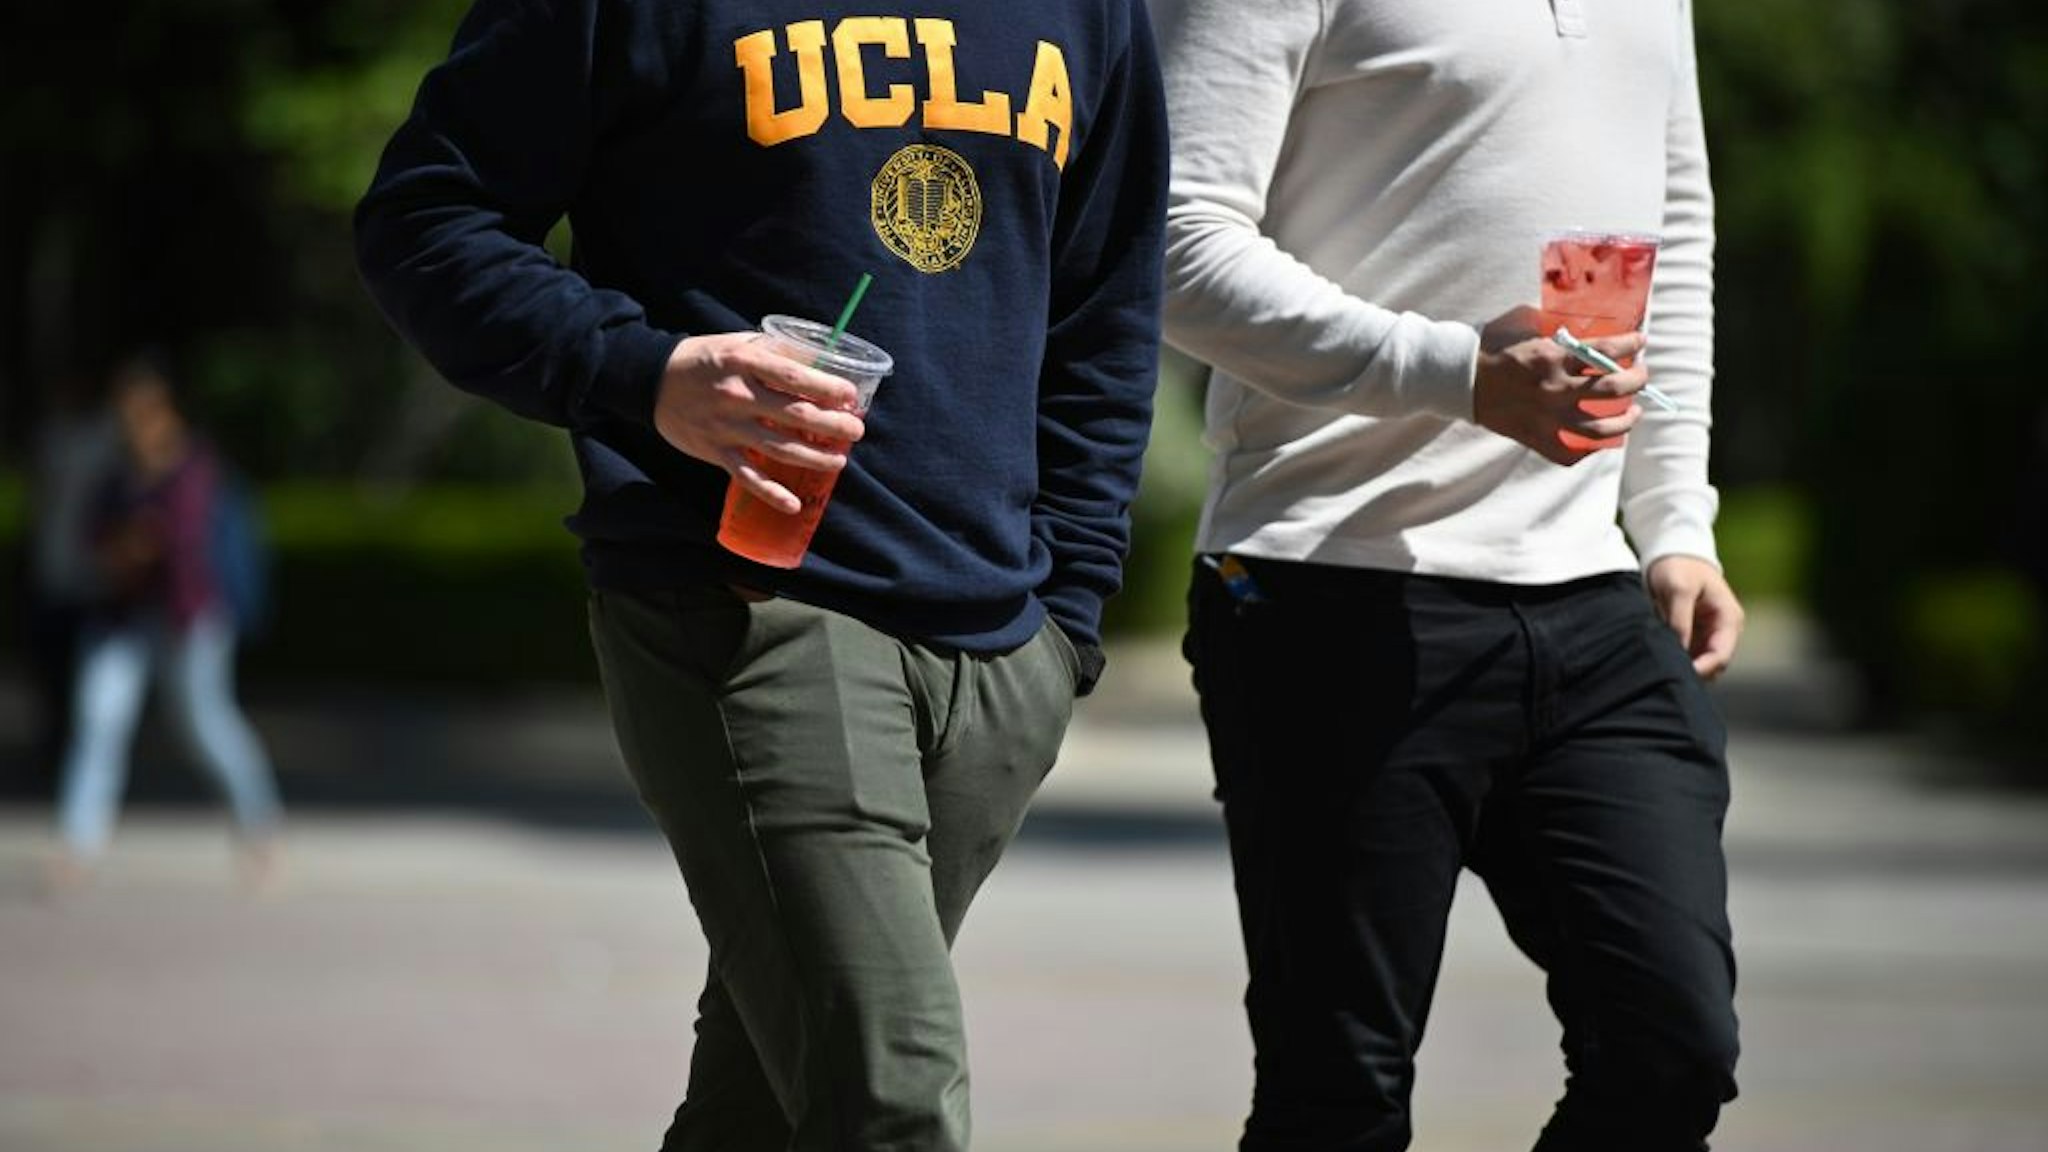 Students walk on the campus of University of California at Los Angeles (UCLA) in Los Angeles, California on March 11, 2020.